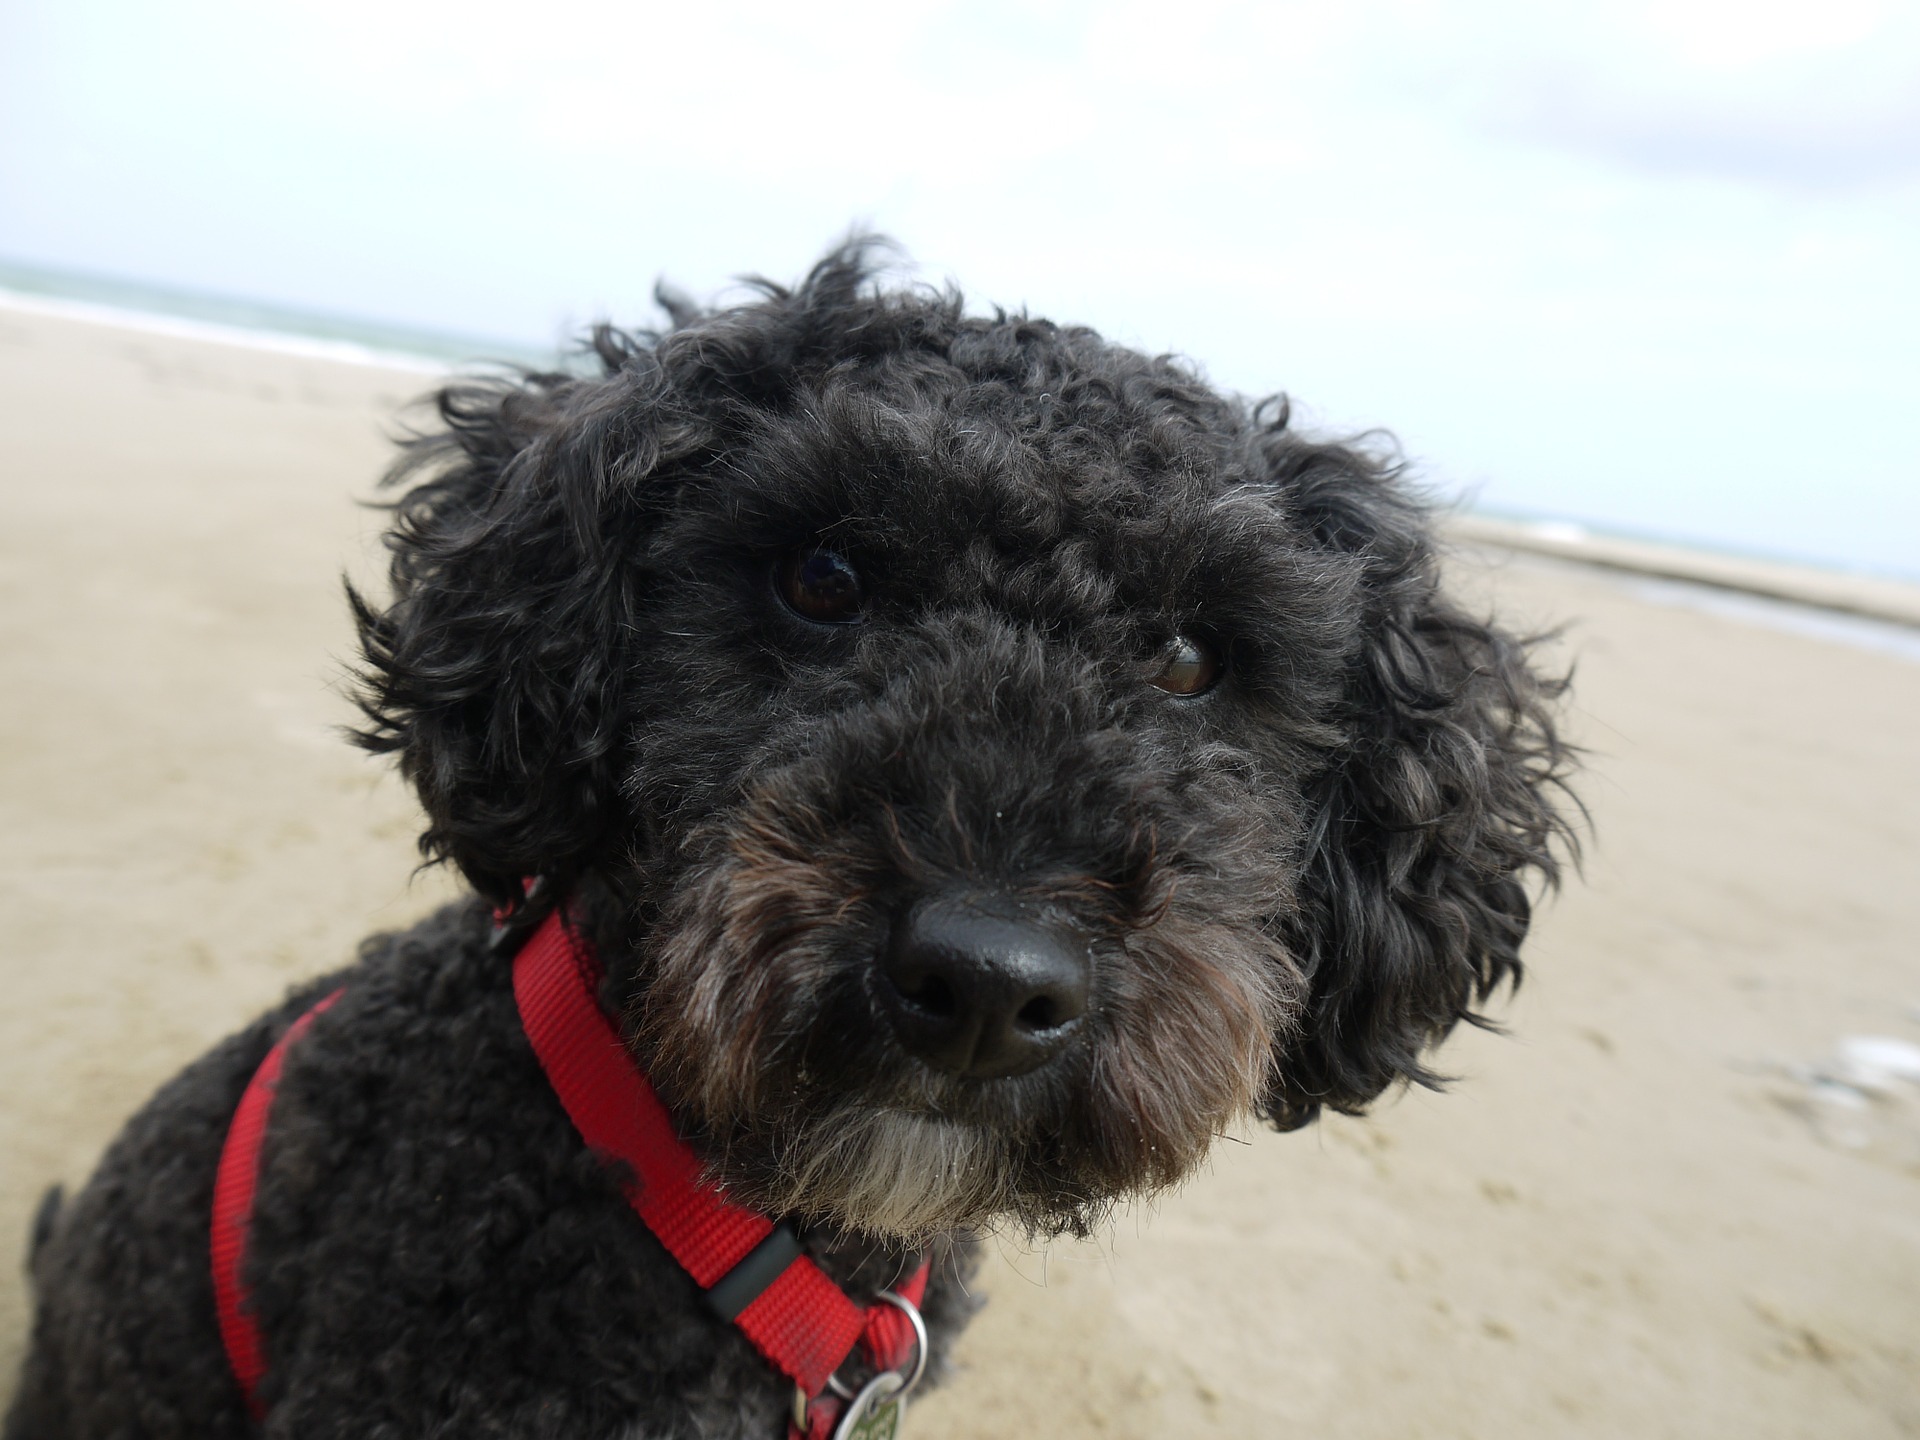 Adorable Miniature Poodle - Facts, Temperament and Care Tips